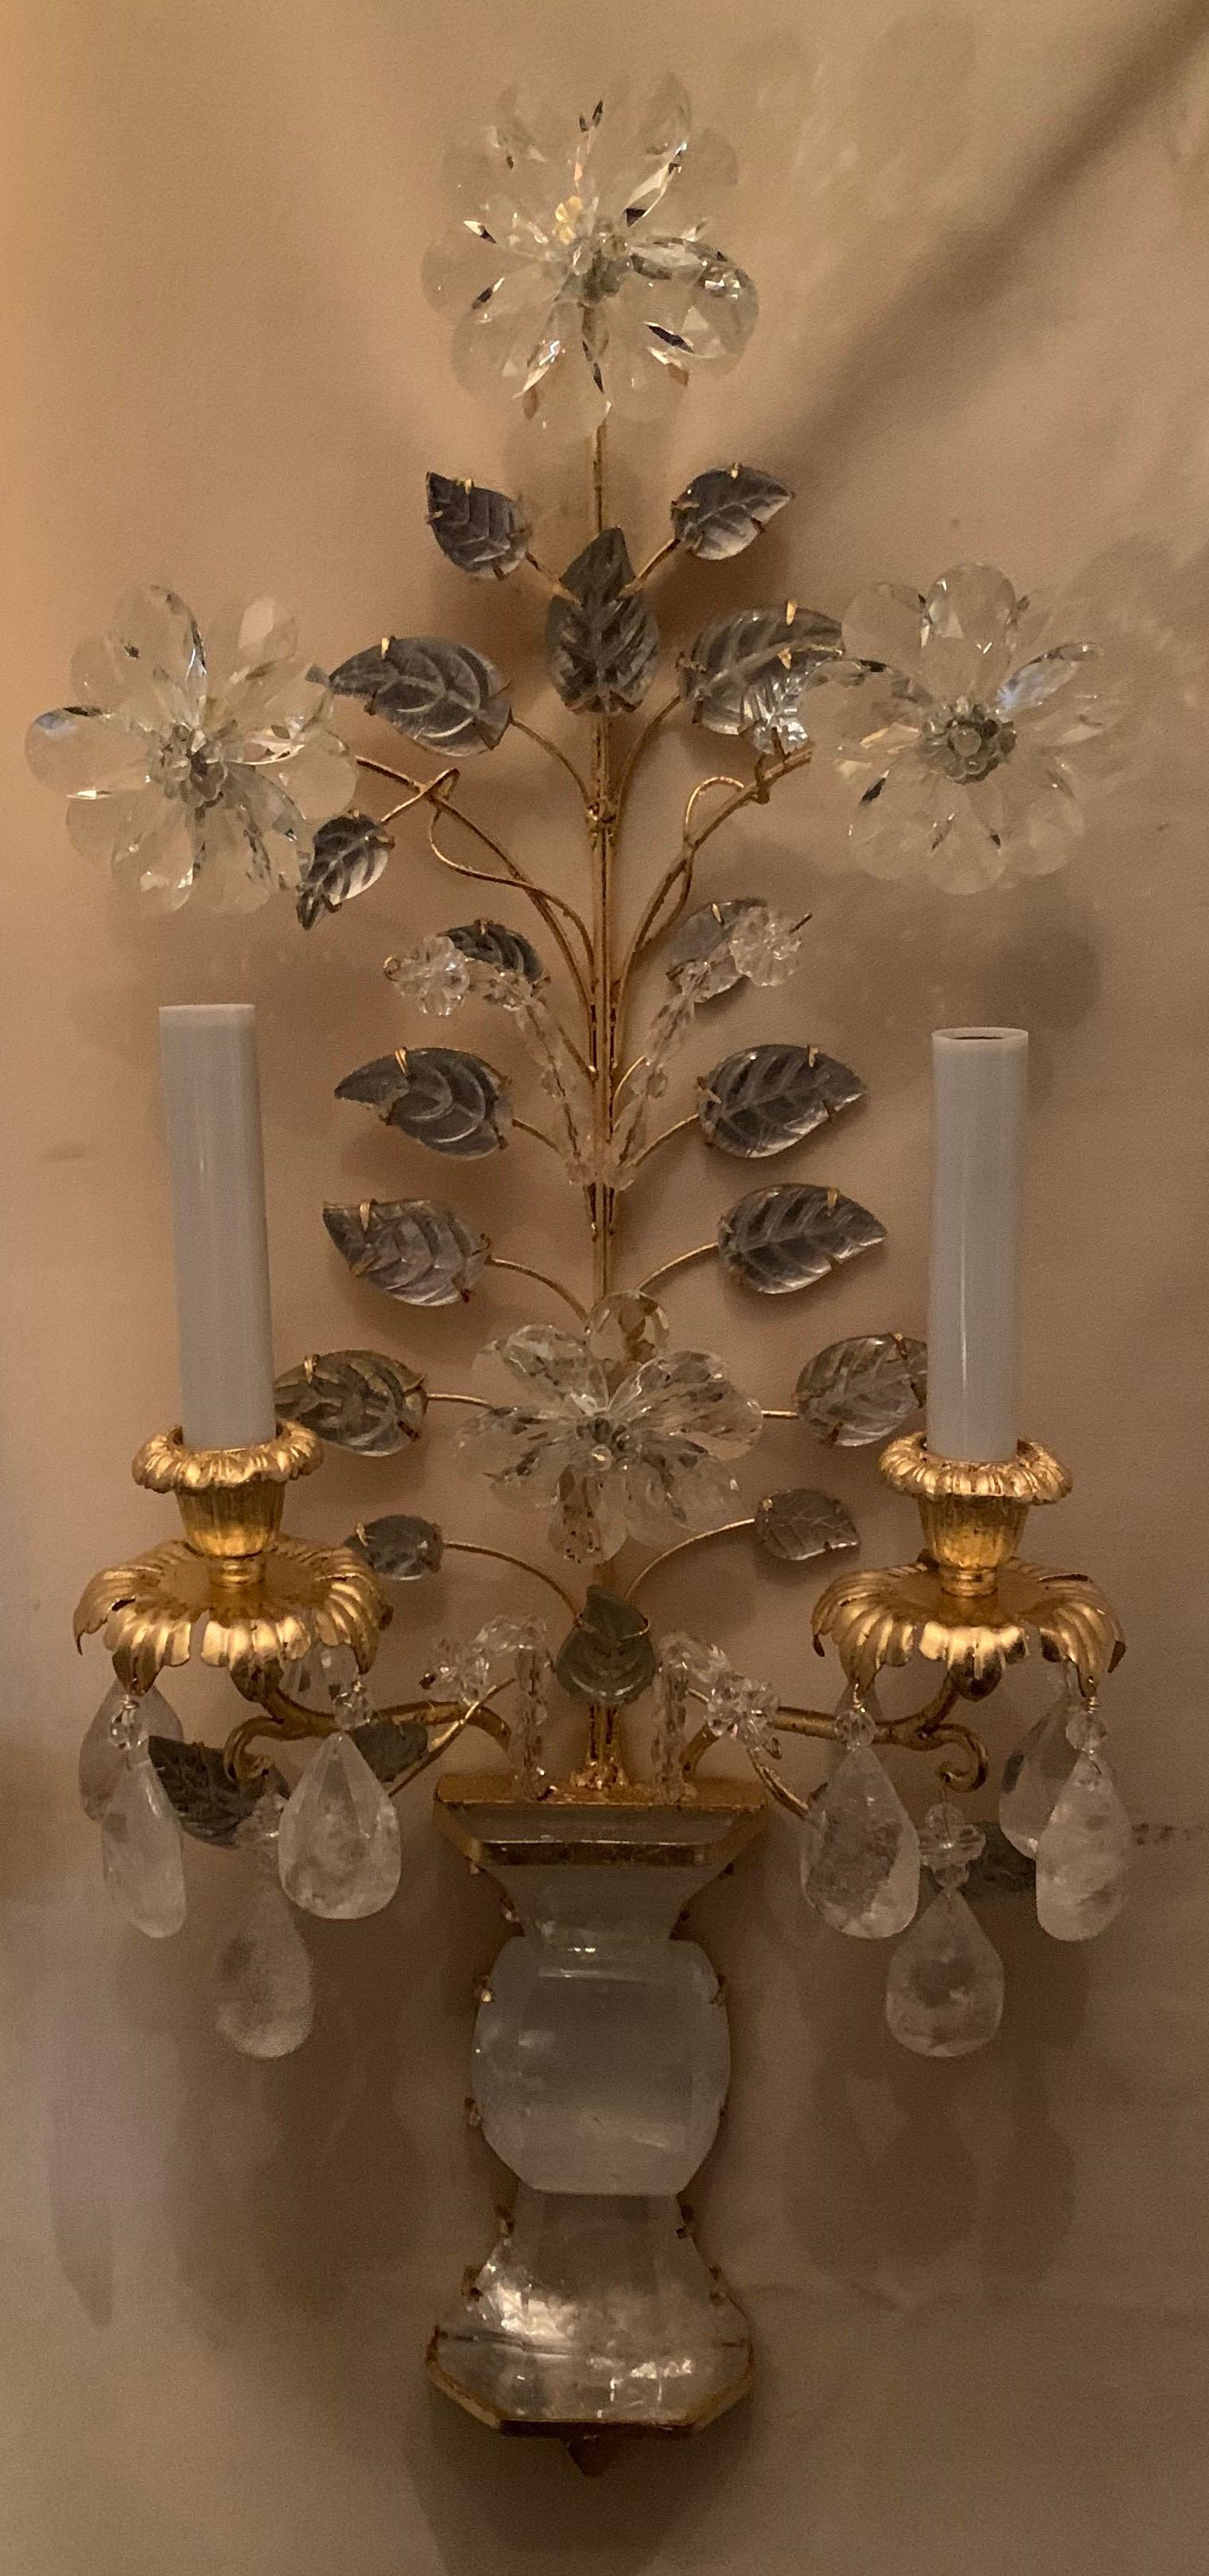 A wonderful pair of gold gilt and rock crystal Baguès style flower and leaf Mid-Century Modern 2 candelabra light wall sconces
completely rewired with new sockets and are ready to install and enjoy.

